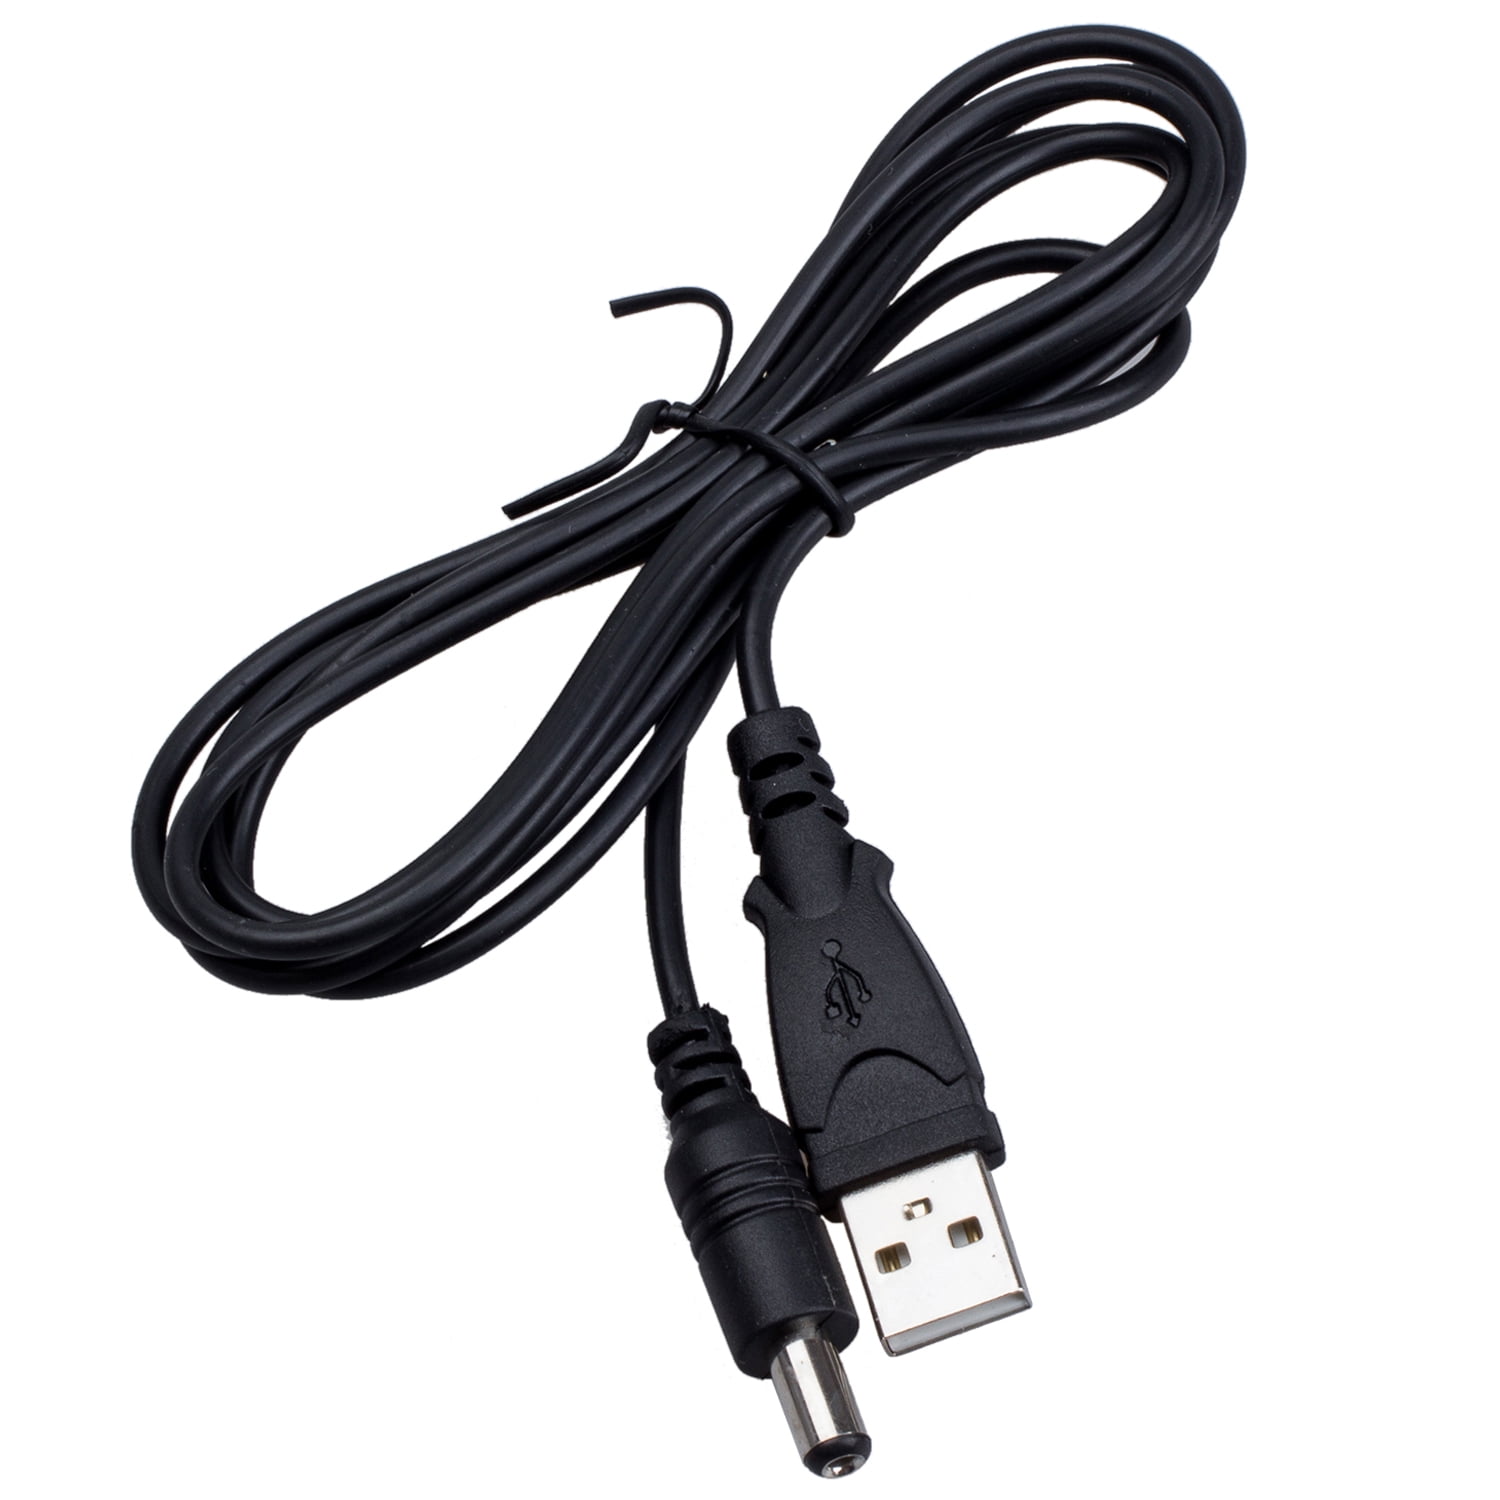 5V usb to DC Power Cable Jack 2m 1m 50cm Universal Type a USB male